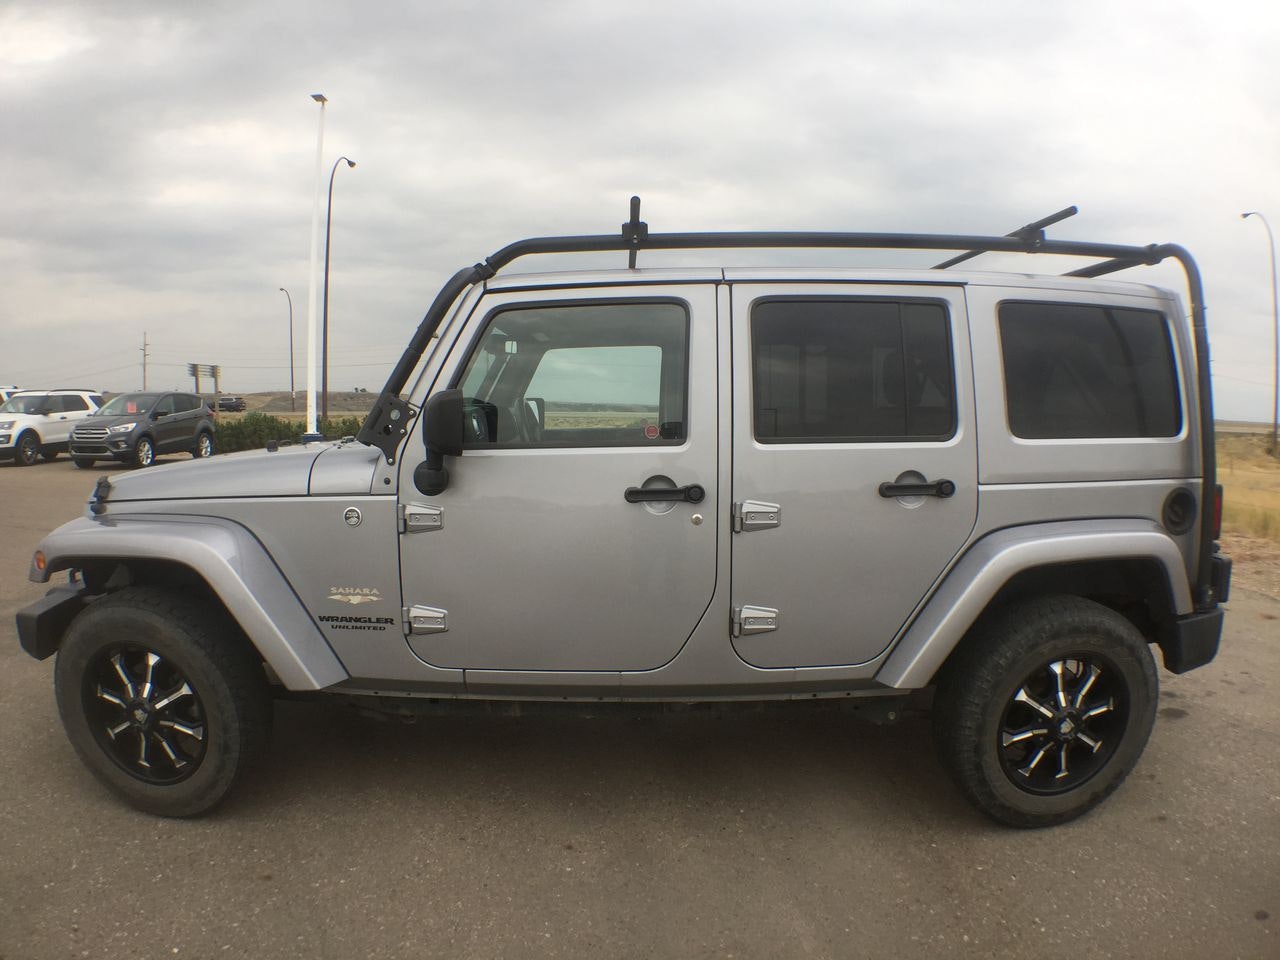 2015 Jeep Wrangler Unlimited Sahara LEATHER NAVIGATION TOW PACKAGE (S922017A) Main Image